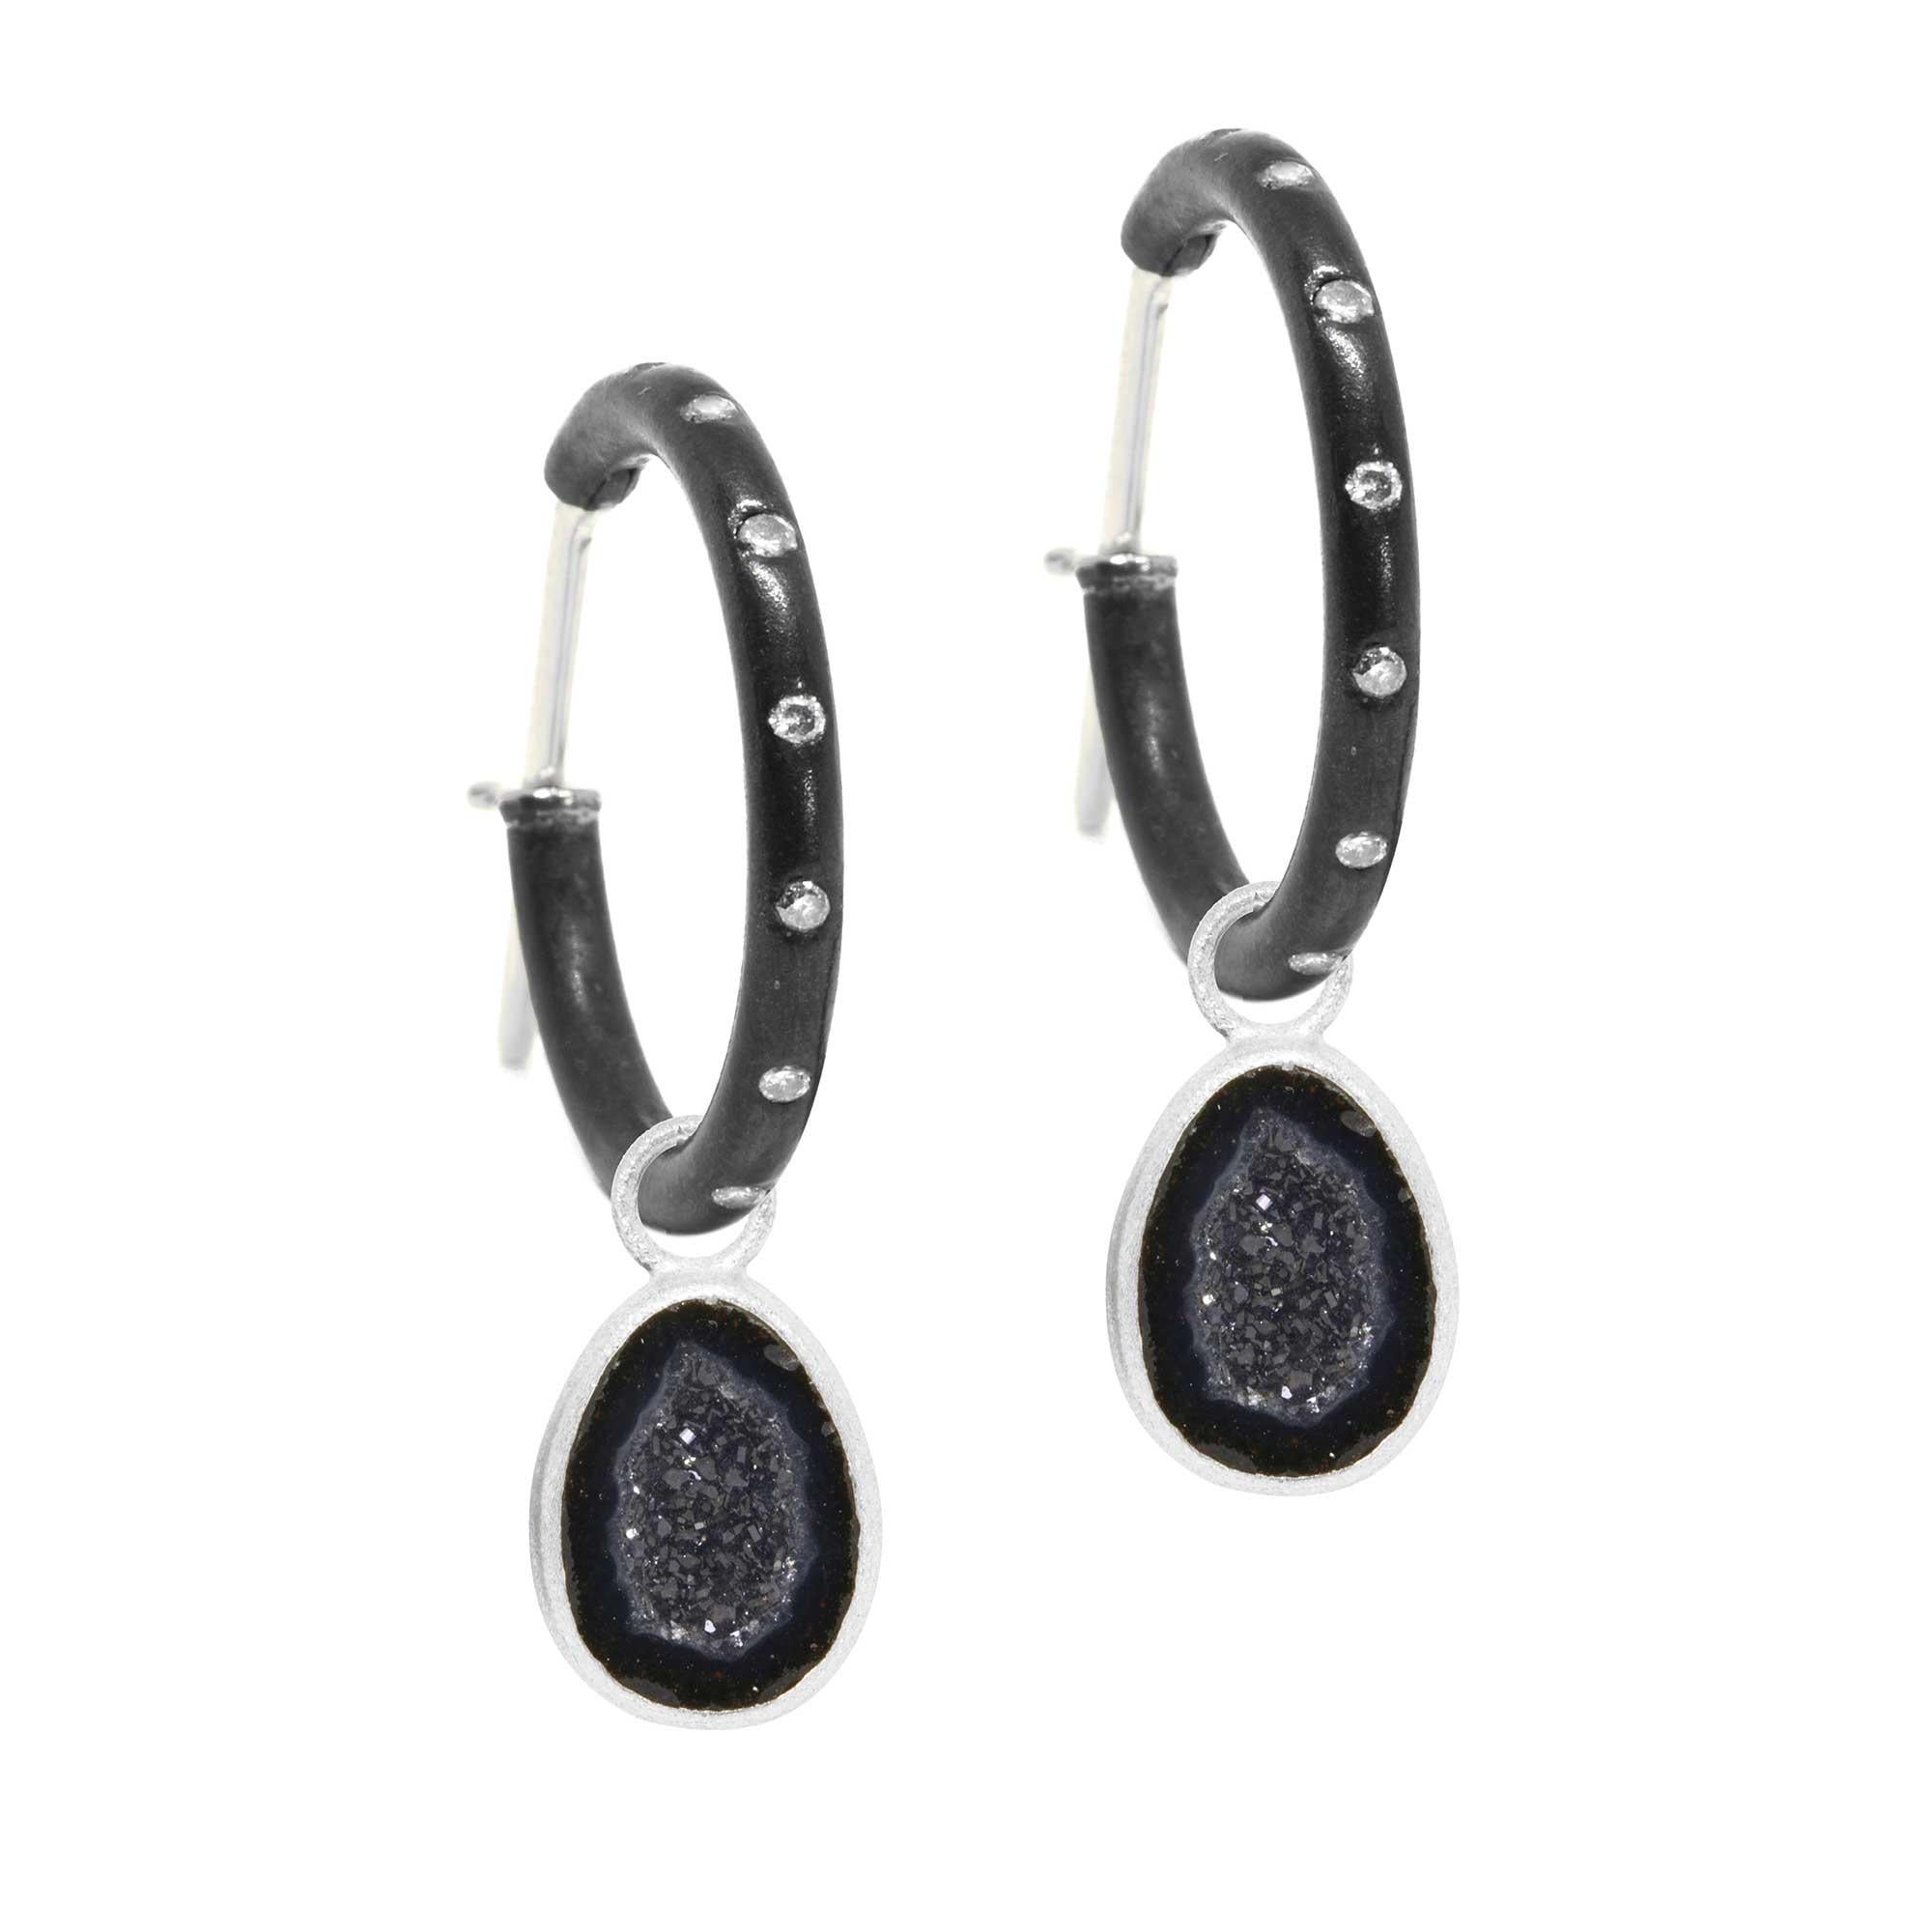 Organic and asymmetrical, and detailed with black geodes for a bold, mysterious edge, the Adorn Petite Silver Charms pair with any of our hoops and mix well with other styles.

Metal: Sterling Silver Oxidized
Stone carat: 4.7
Diamond carat: